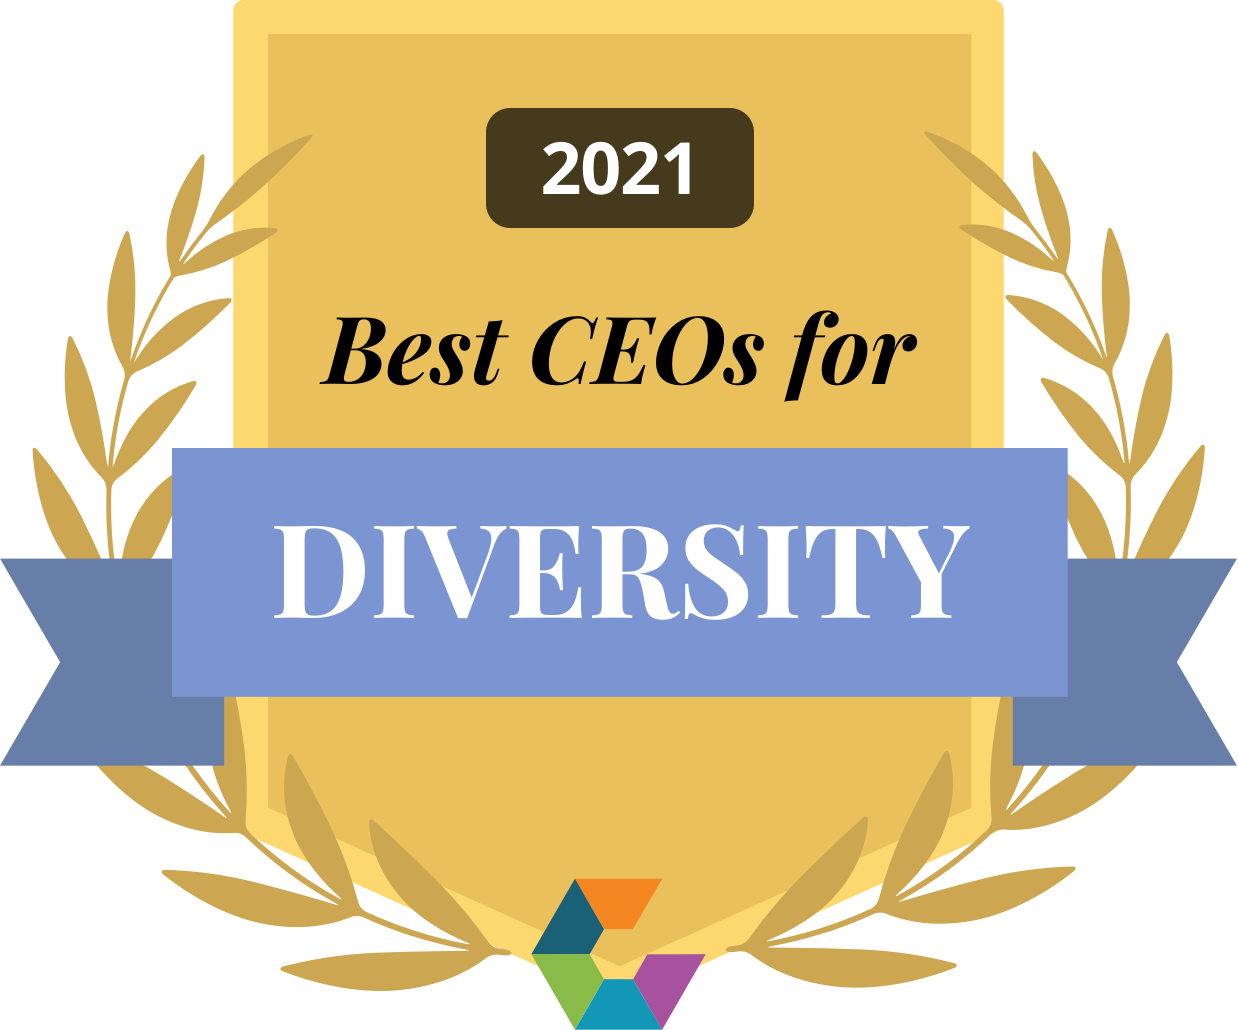 Comparably Best CEOs for Diversity 2021